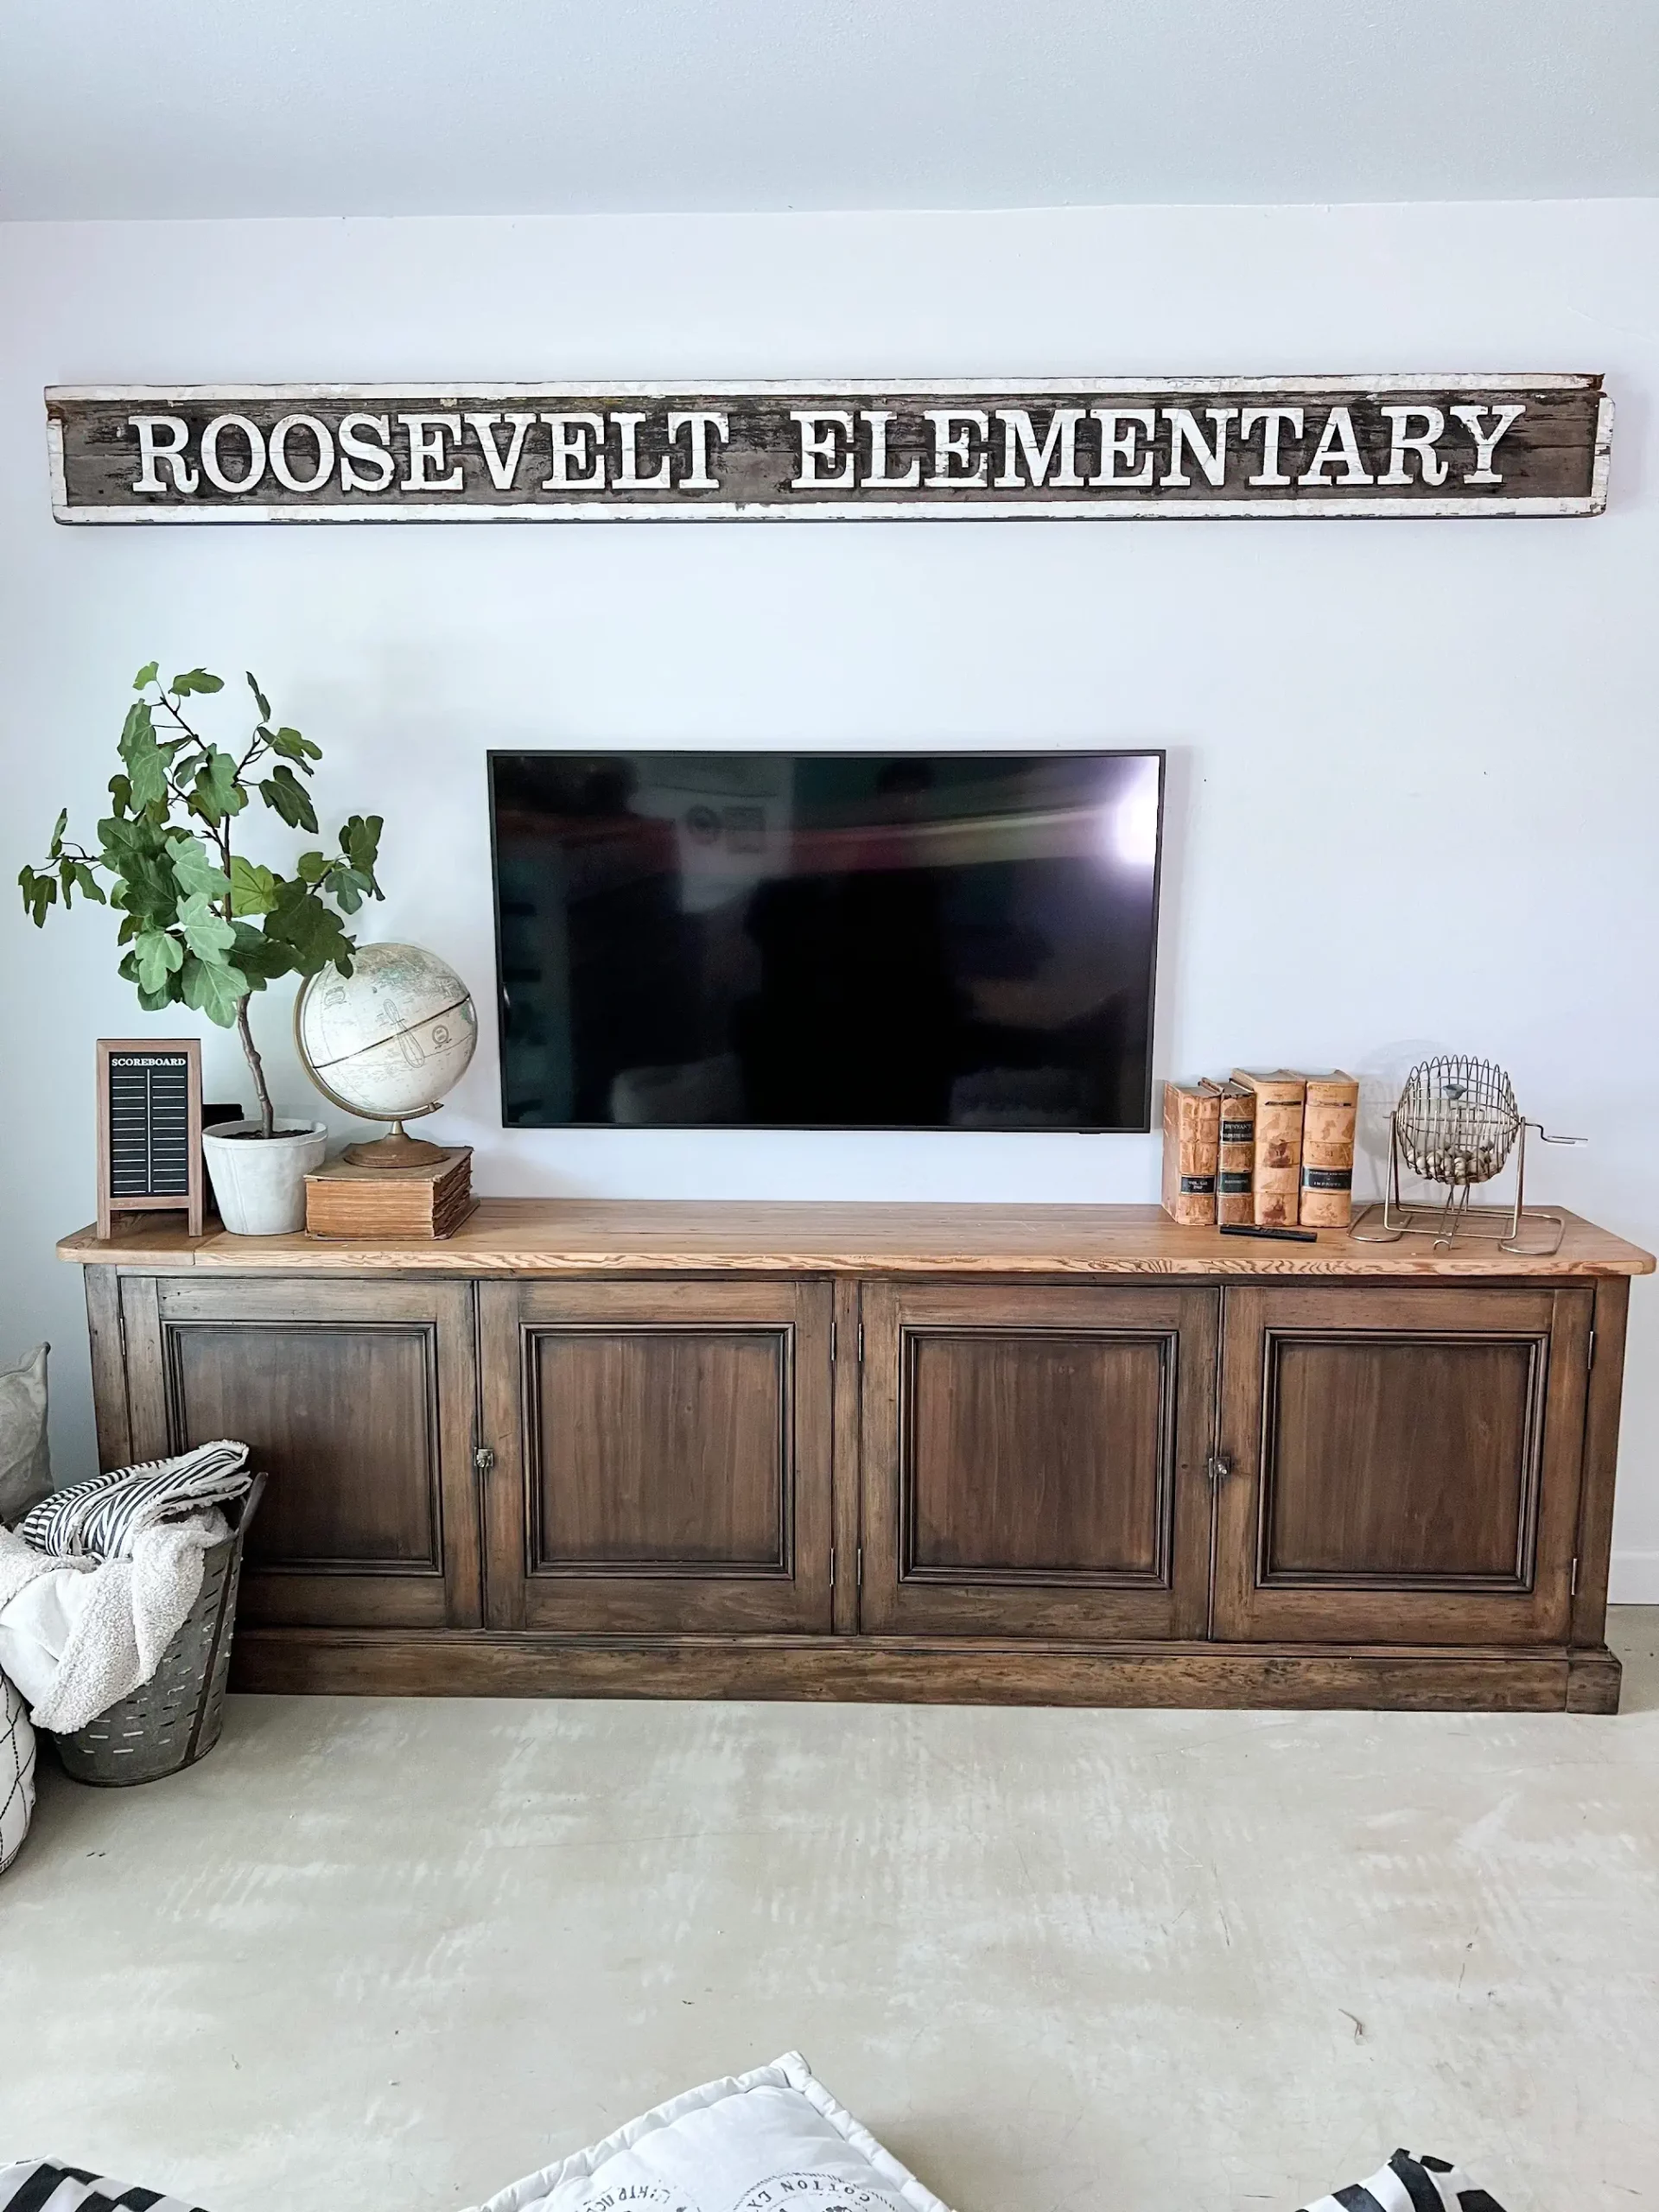 large wooden console table styled with books and a plant with a TV above it as well as a sign that says "Roosevelt Elementary"